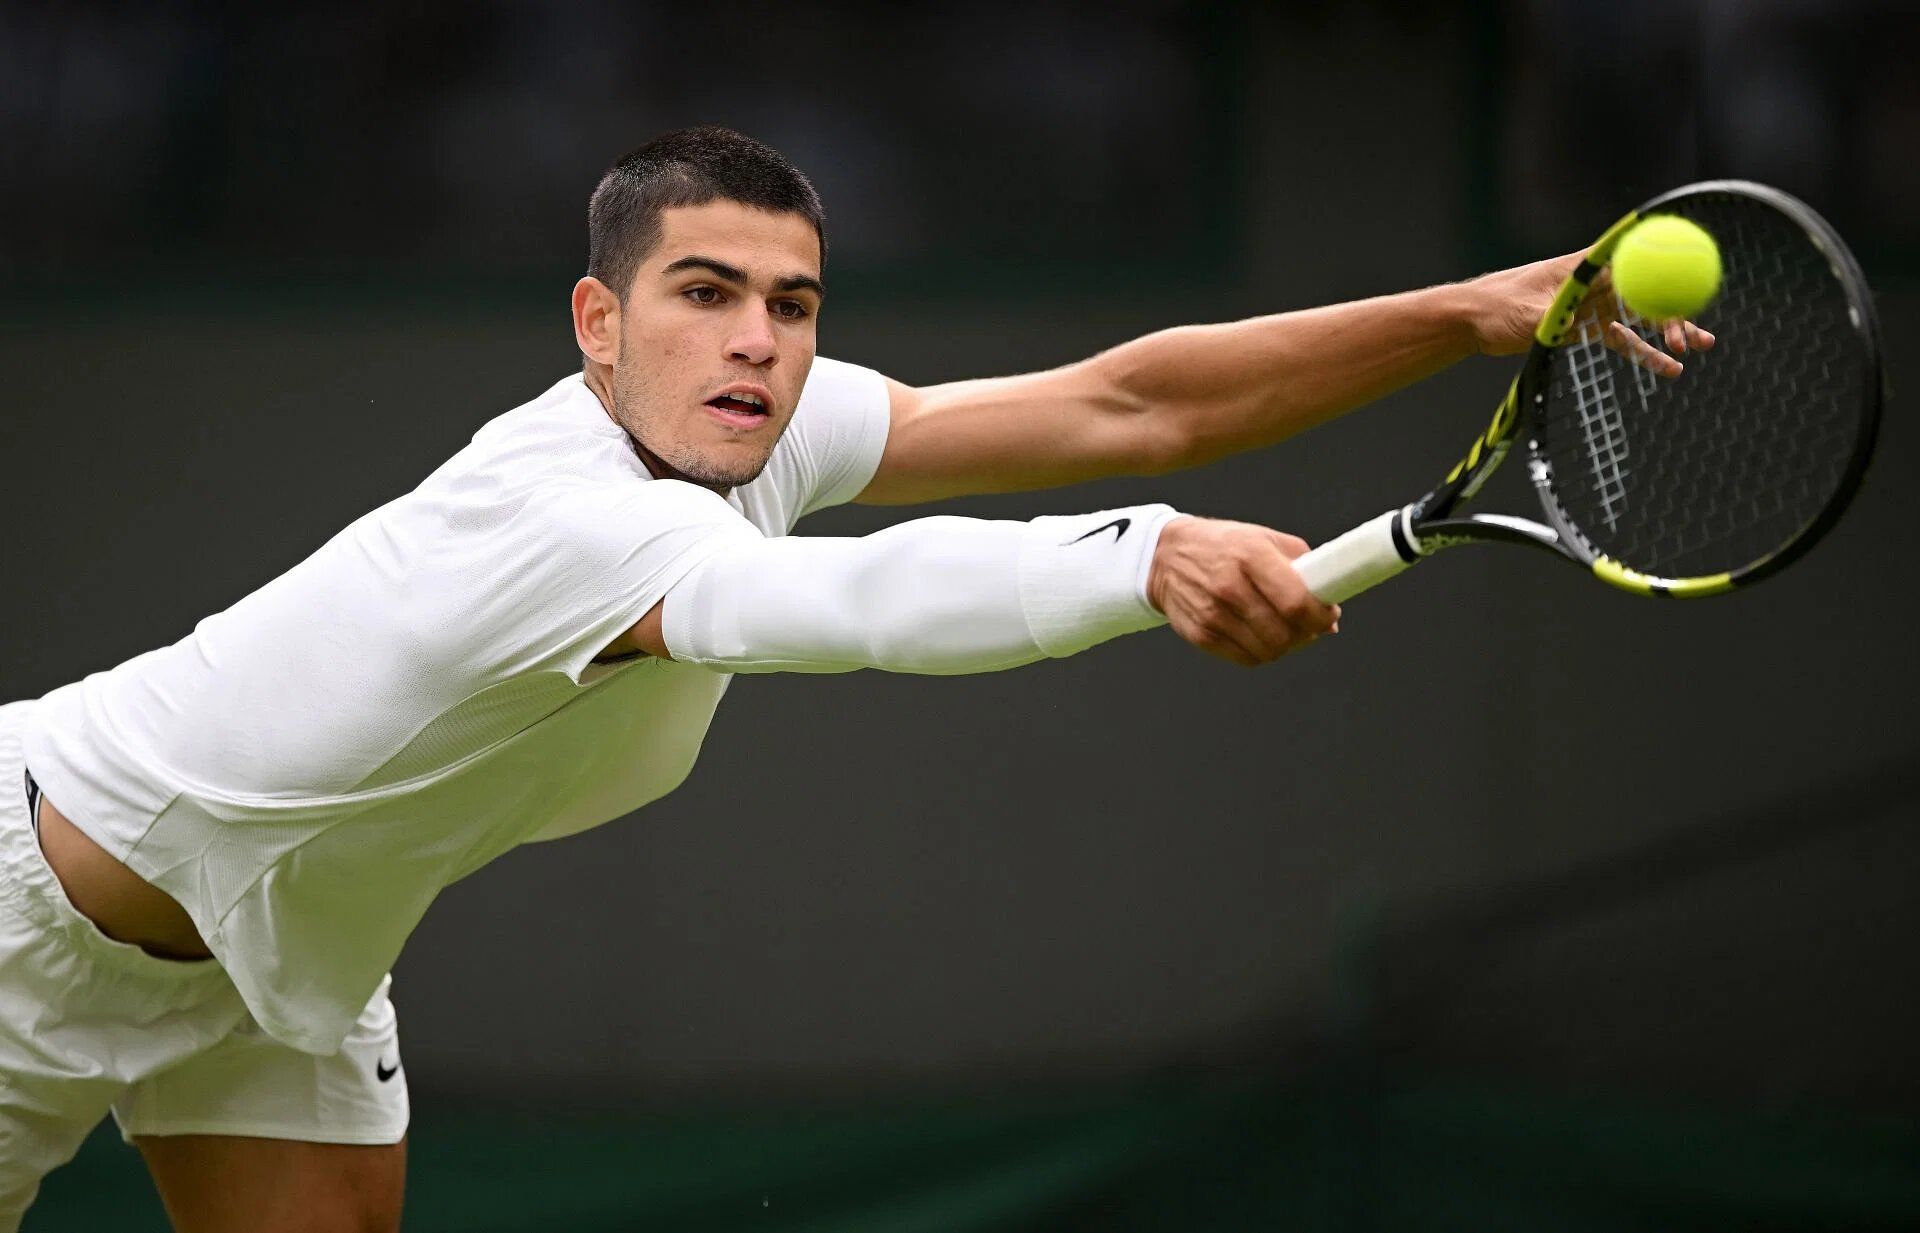 How to watch for free Oscar Otte vs Carlos Alcaraz Wimbledon 2022 and on TV, @05:30 PM